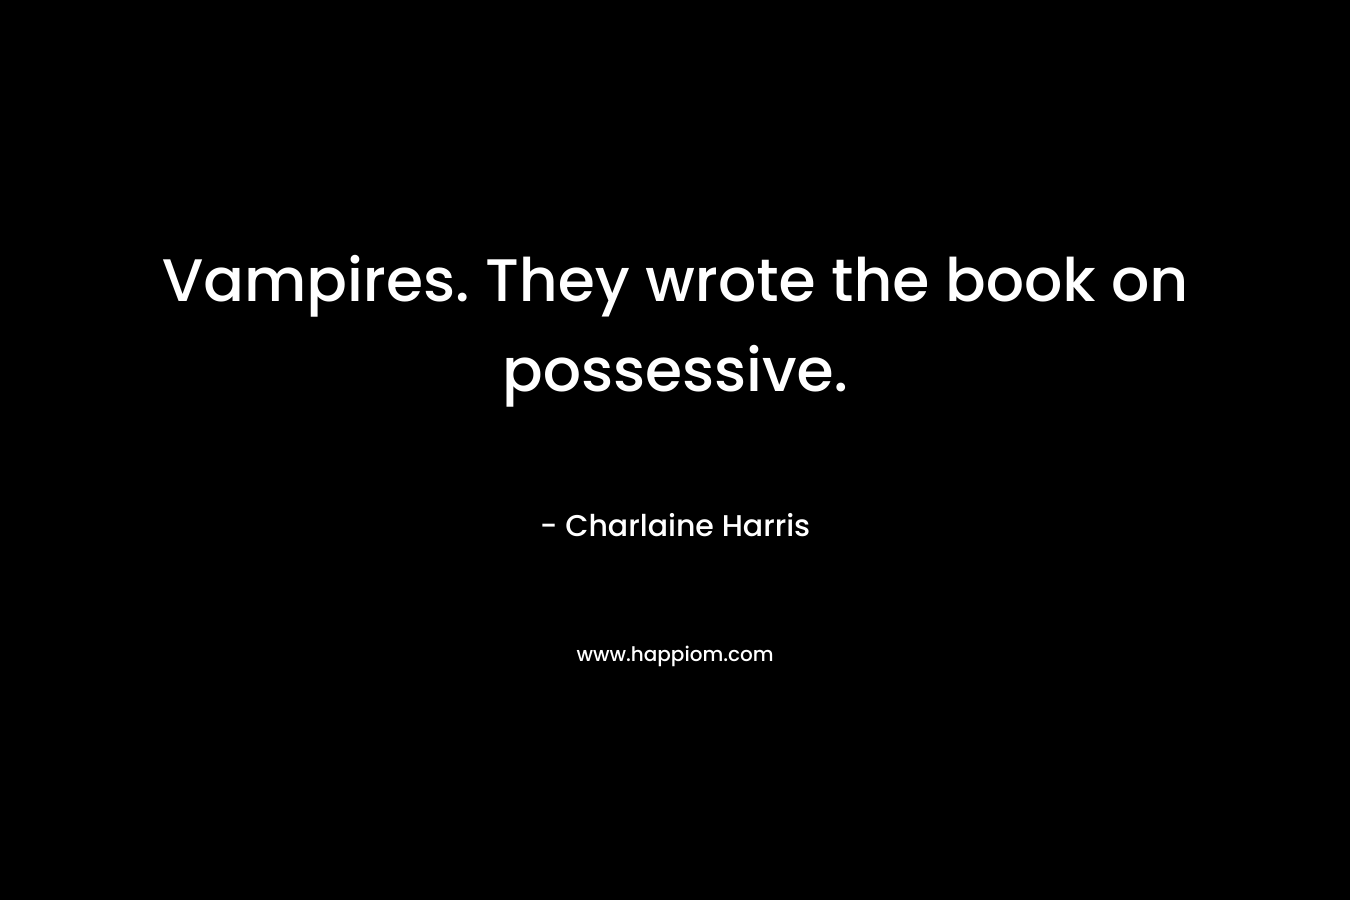 Vampires. They wrote the book on possessive.